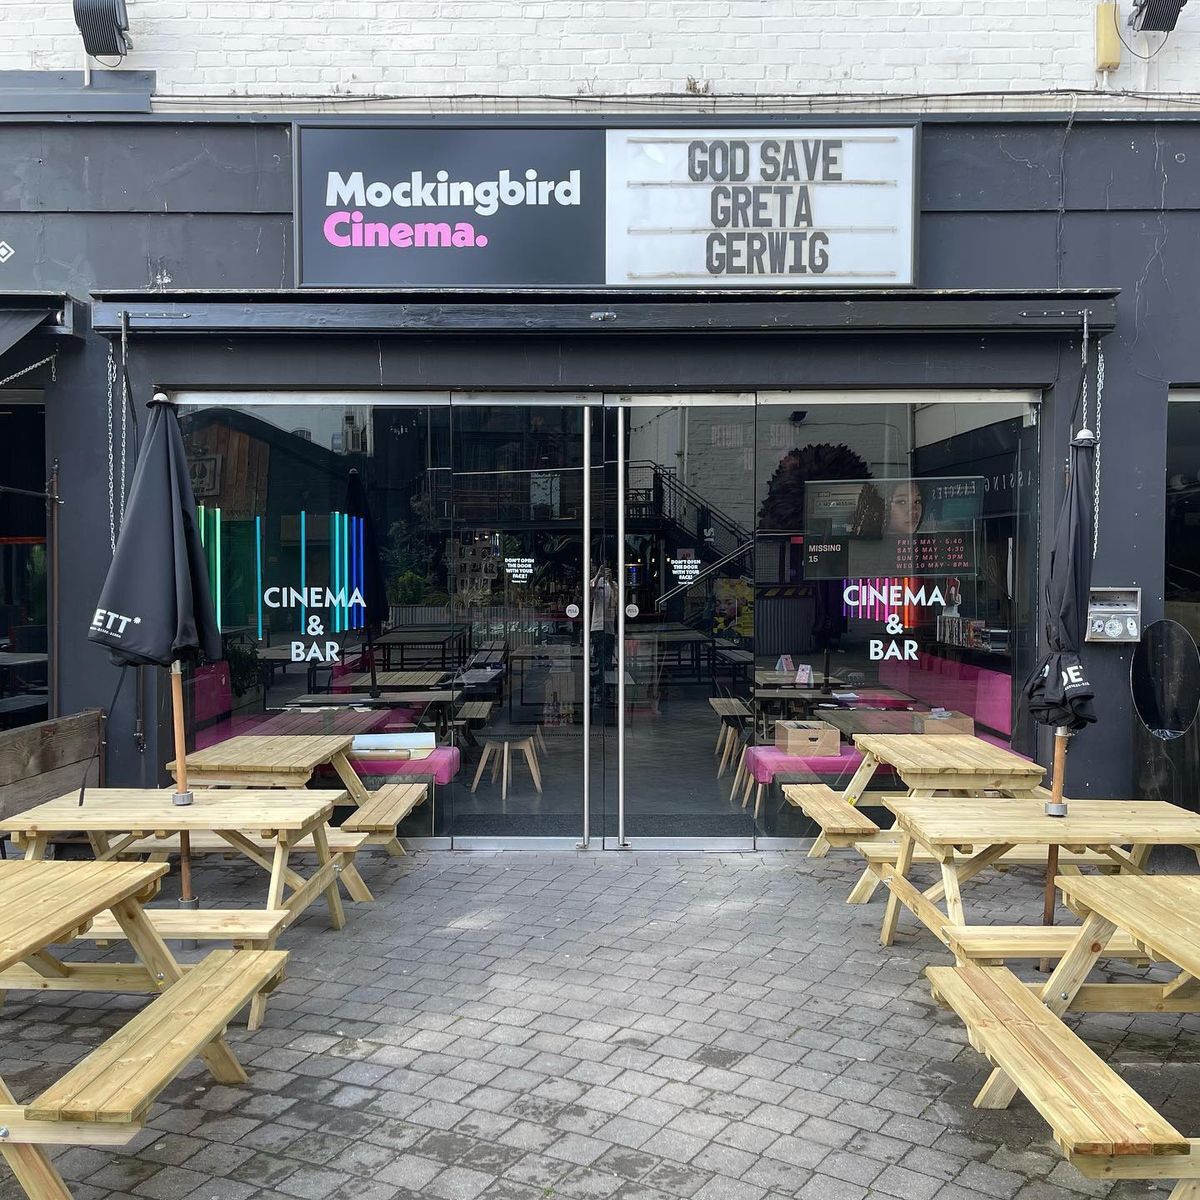 <p>If you’re a film buff, the <a href="https://www.mockingbirdcinema.com">Mockingbird Cinema</a> should be on your radar. It’s one of the best independent venues in Birmingham. While the cinema shows all of the big blockbusters you would expect, it also plays a selection of independent and niche flicks. As if that wasn’t enough, there are tons of film-themed events and special occasions to boot.</p>